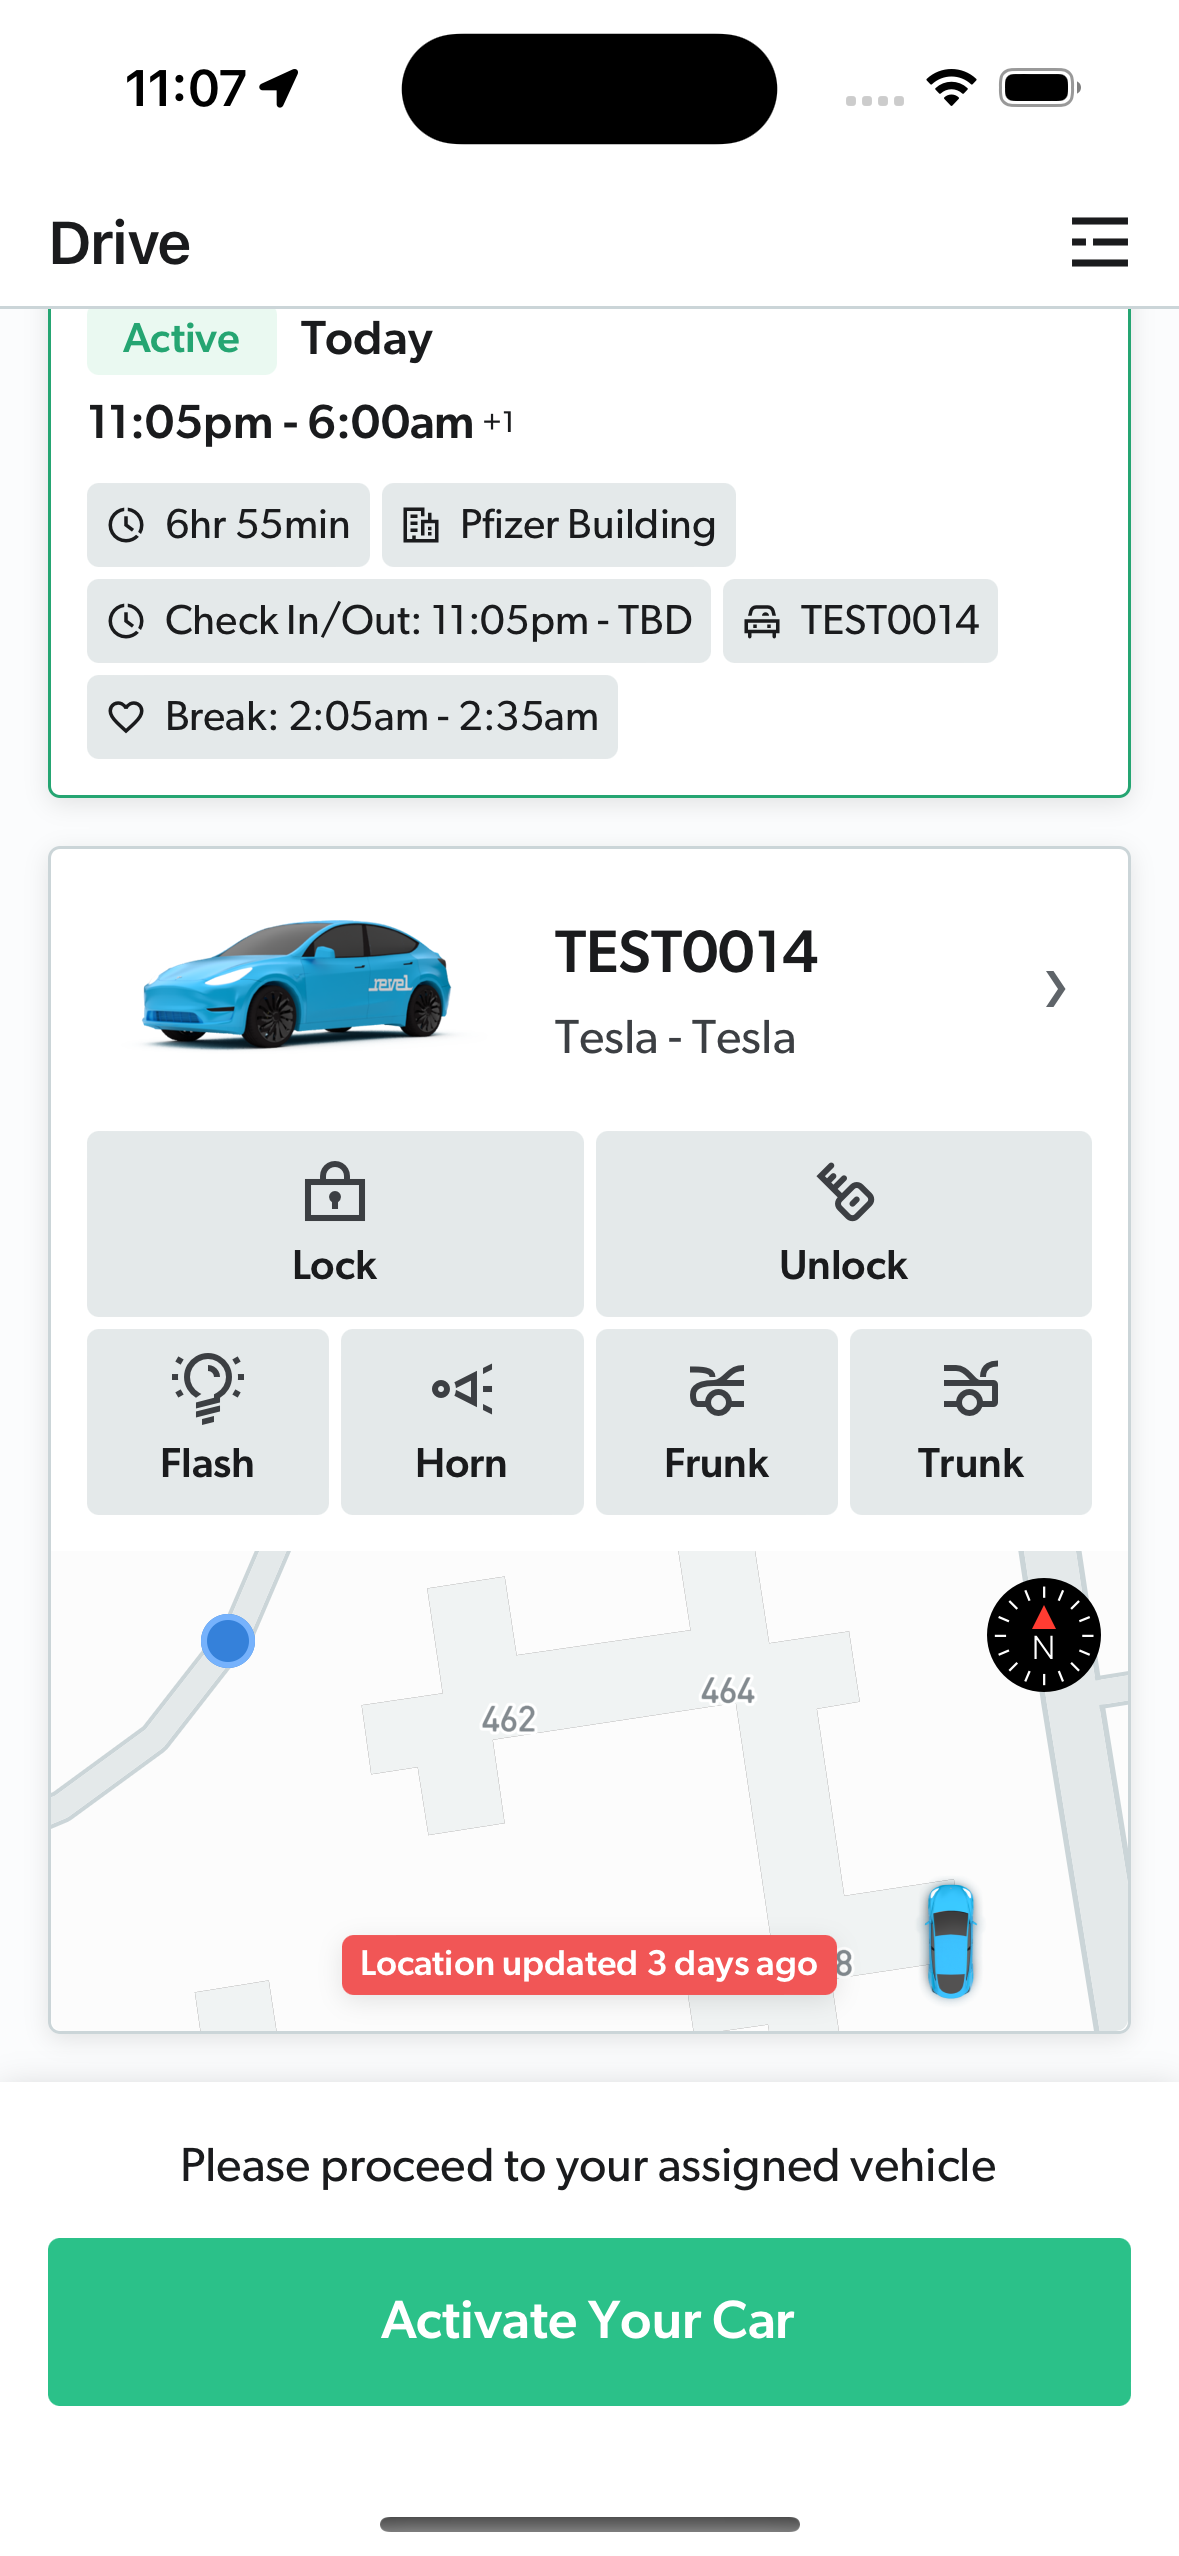 The driver app drive page.